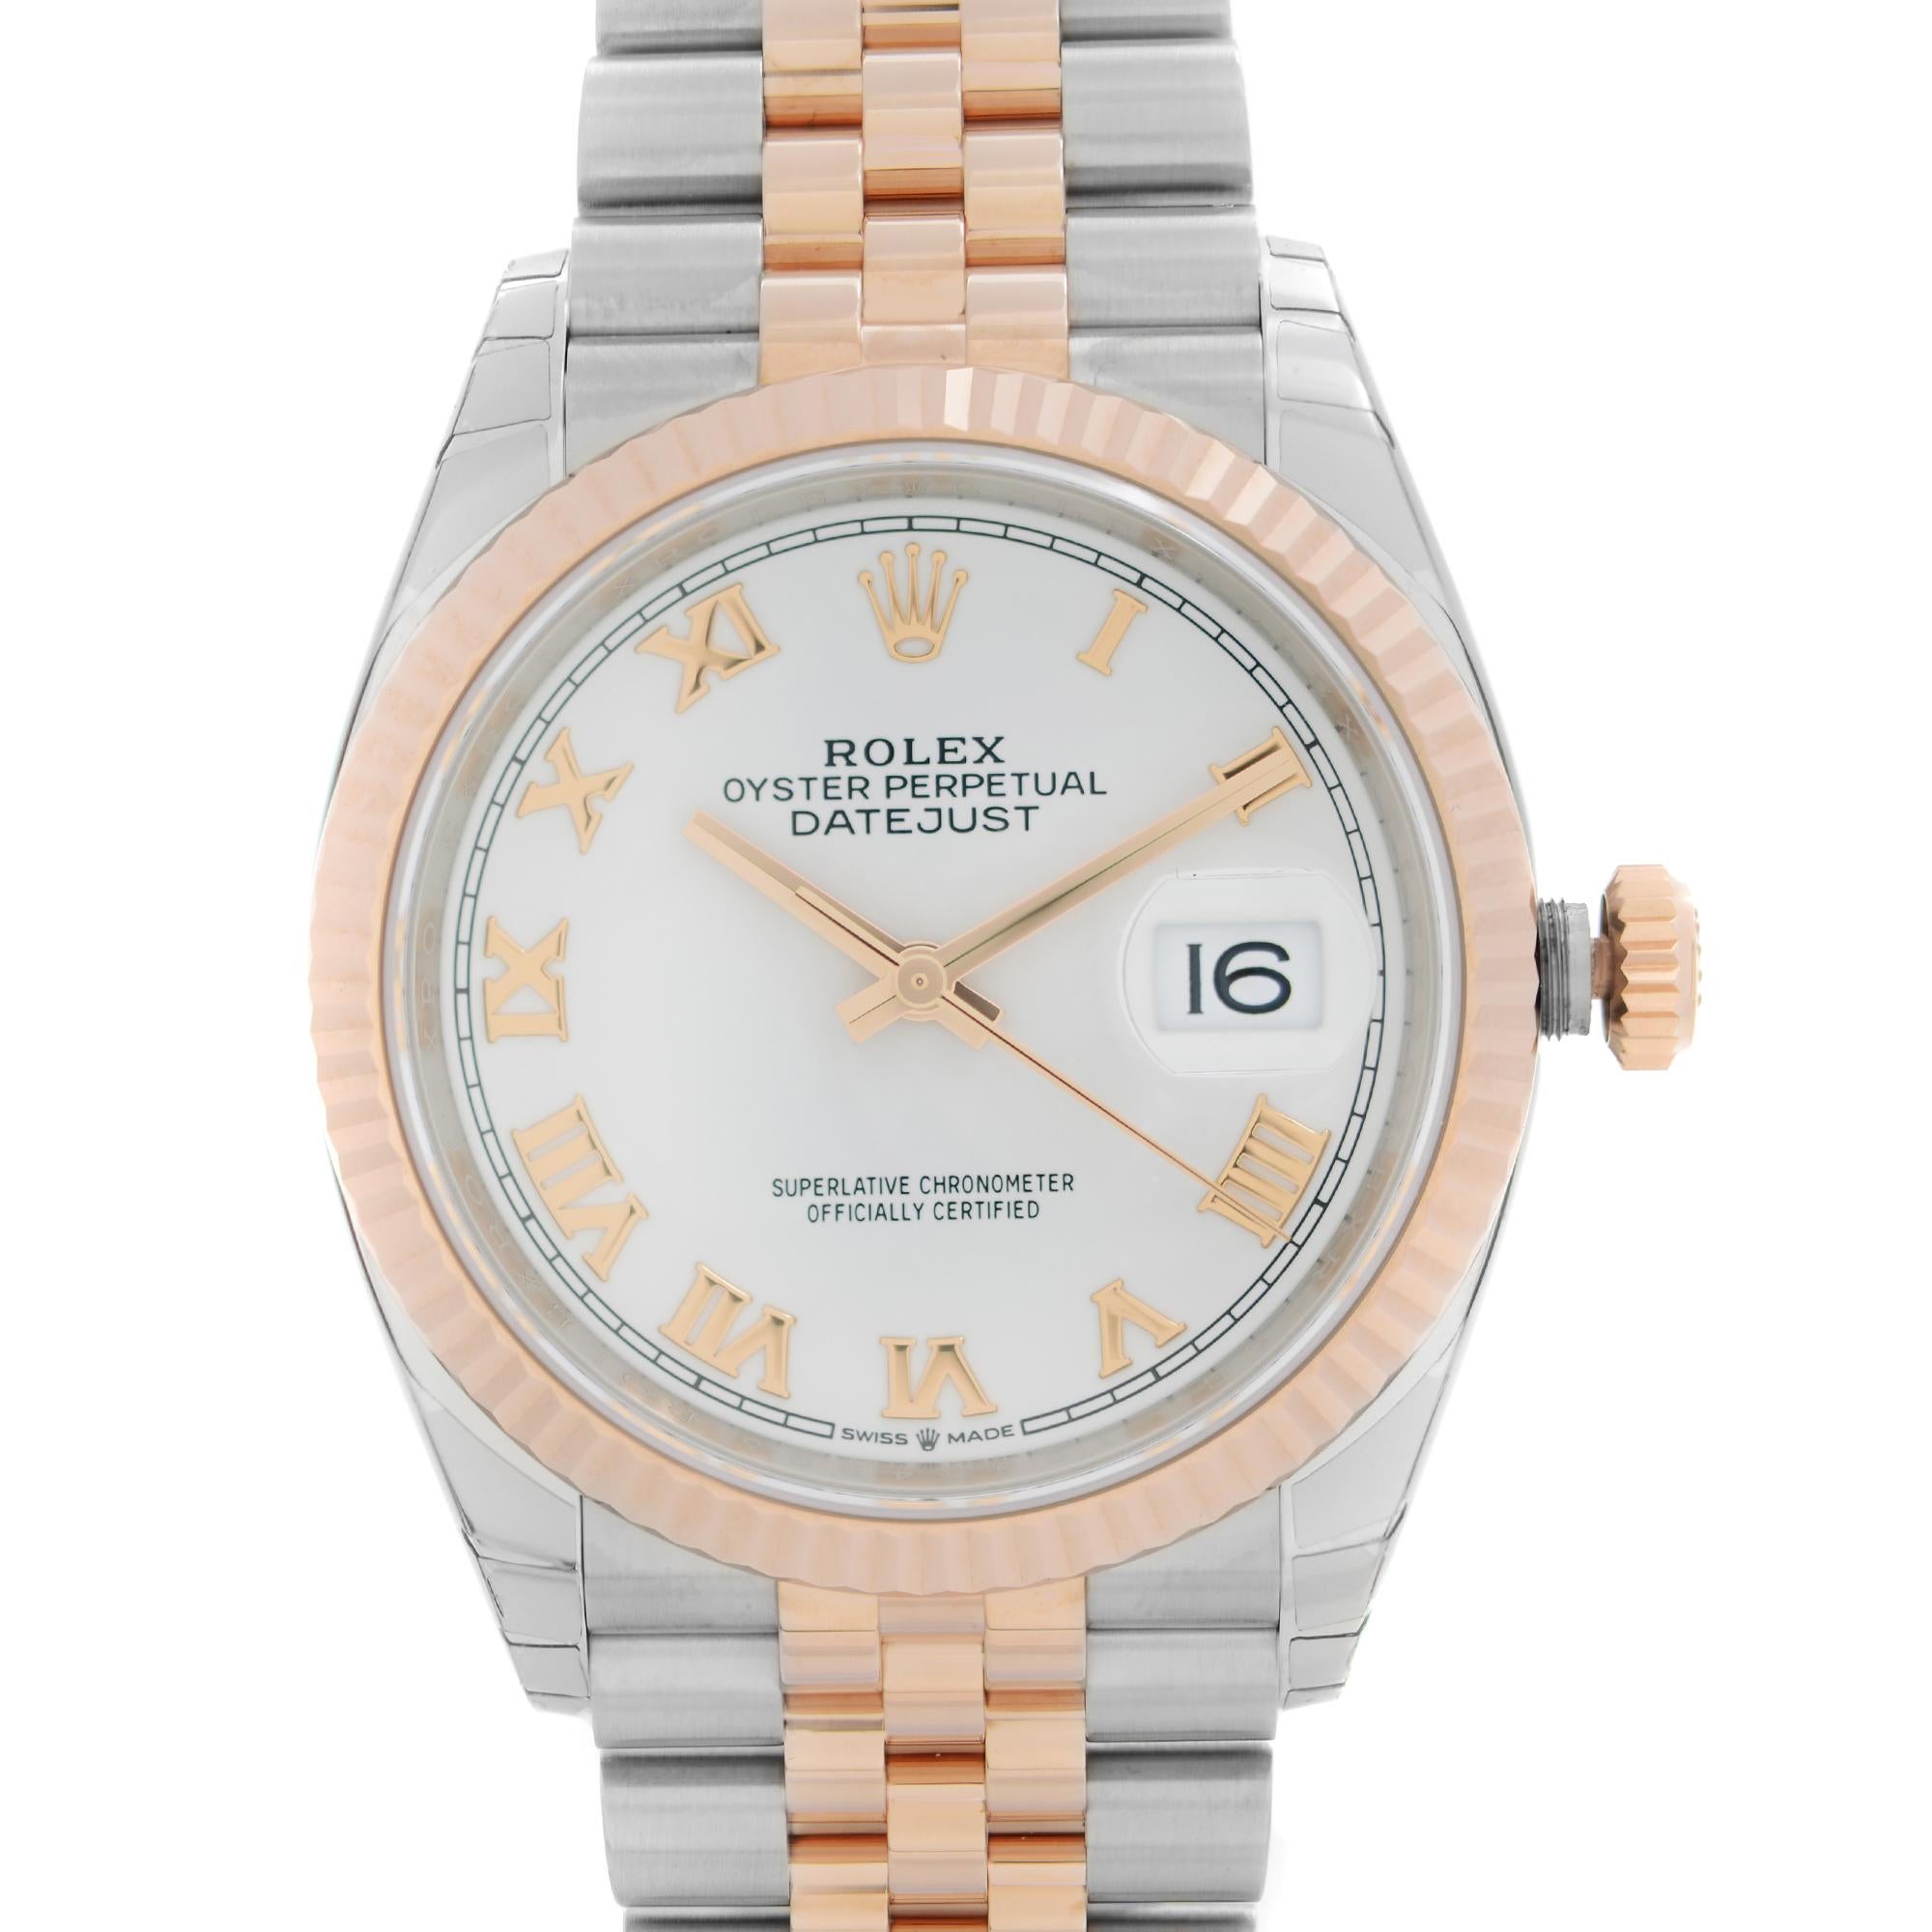 Unworn 2021 Card. Rolex Datejust 36 mm 18k Everose Gold Stainless Steel White Dial Men's Automatic Watch 126231WRJ. This Timepiece is powered by an Automatic Movement and Features: Polished Steel Round Case. Stainless Steel and 18kt Everose Gold